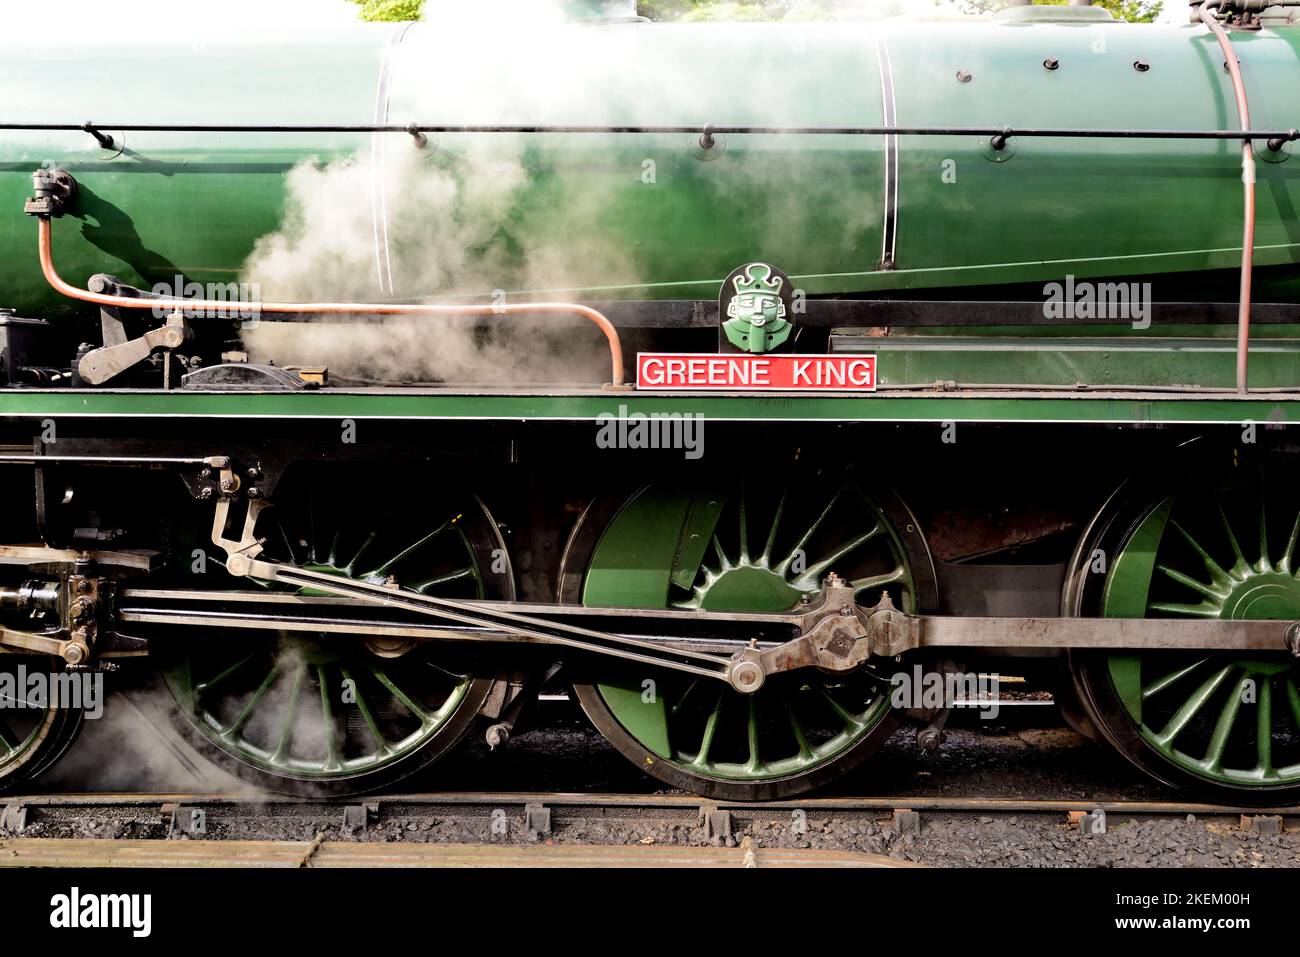 Southern Railway class S15 locomotive No 825 at Goathland, North Yorkshire Moors Railway, carrying the Greene King nameplate. Stock Photo